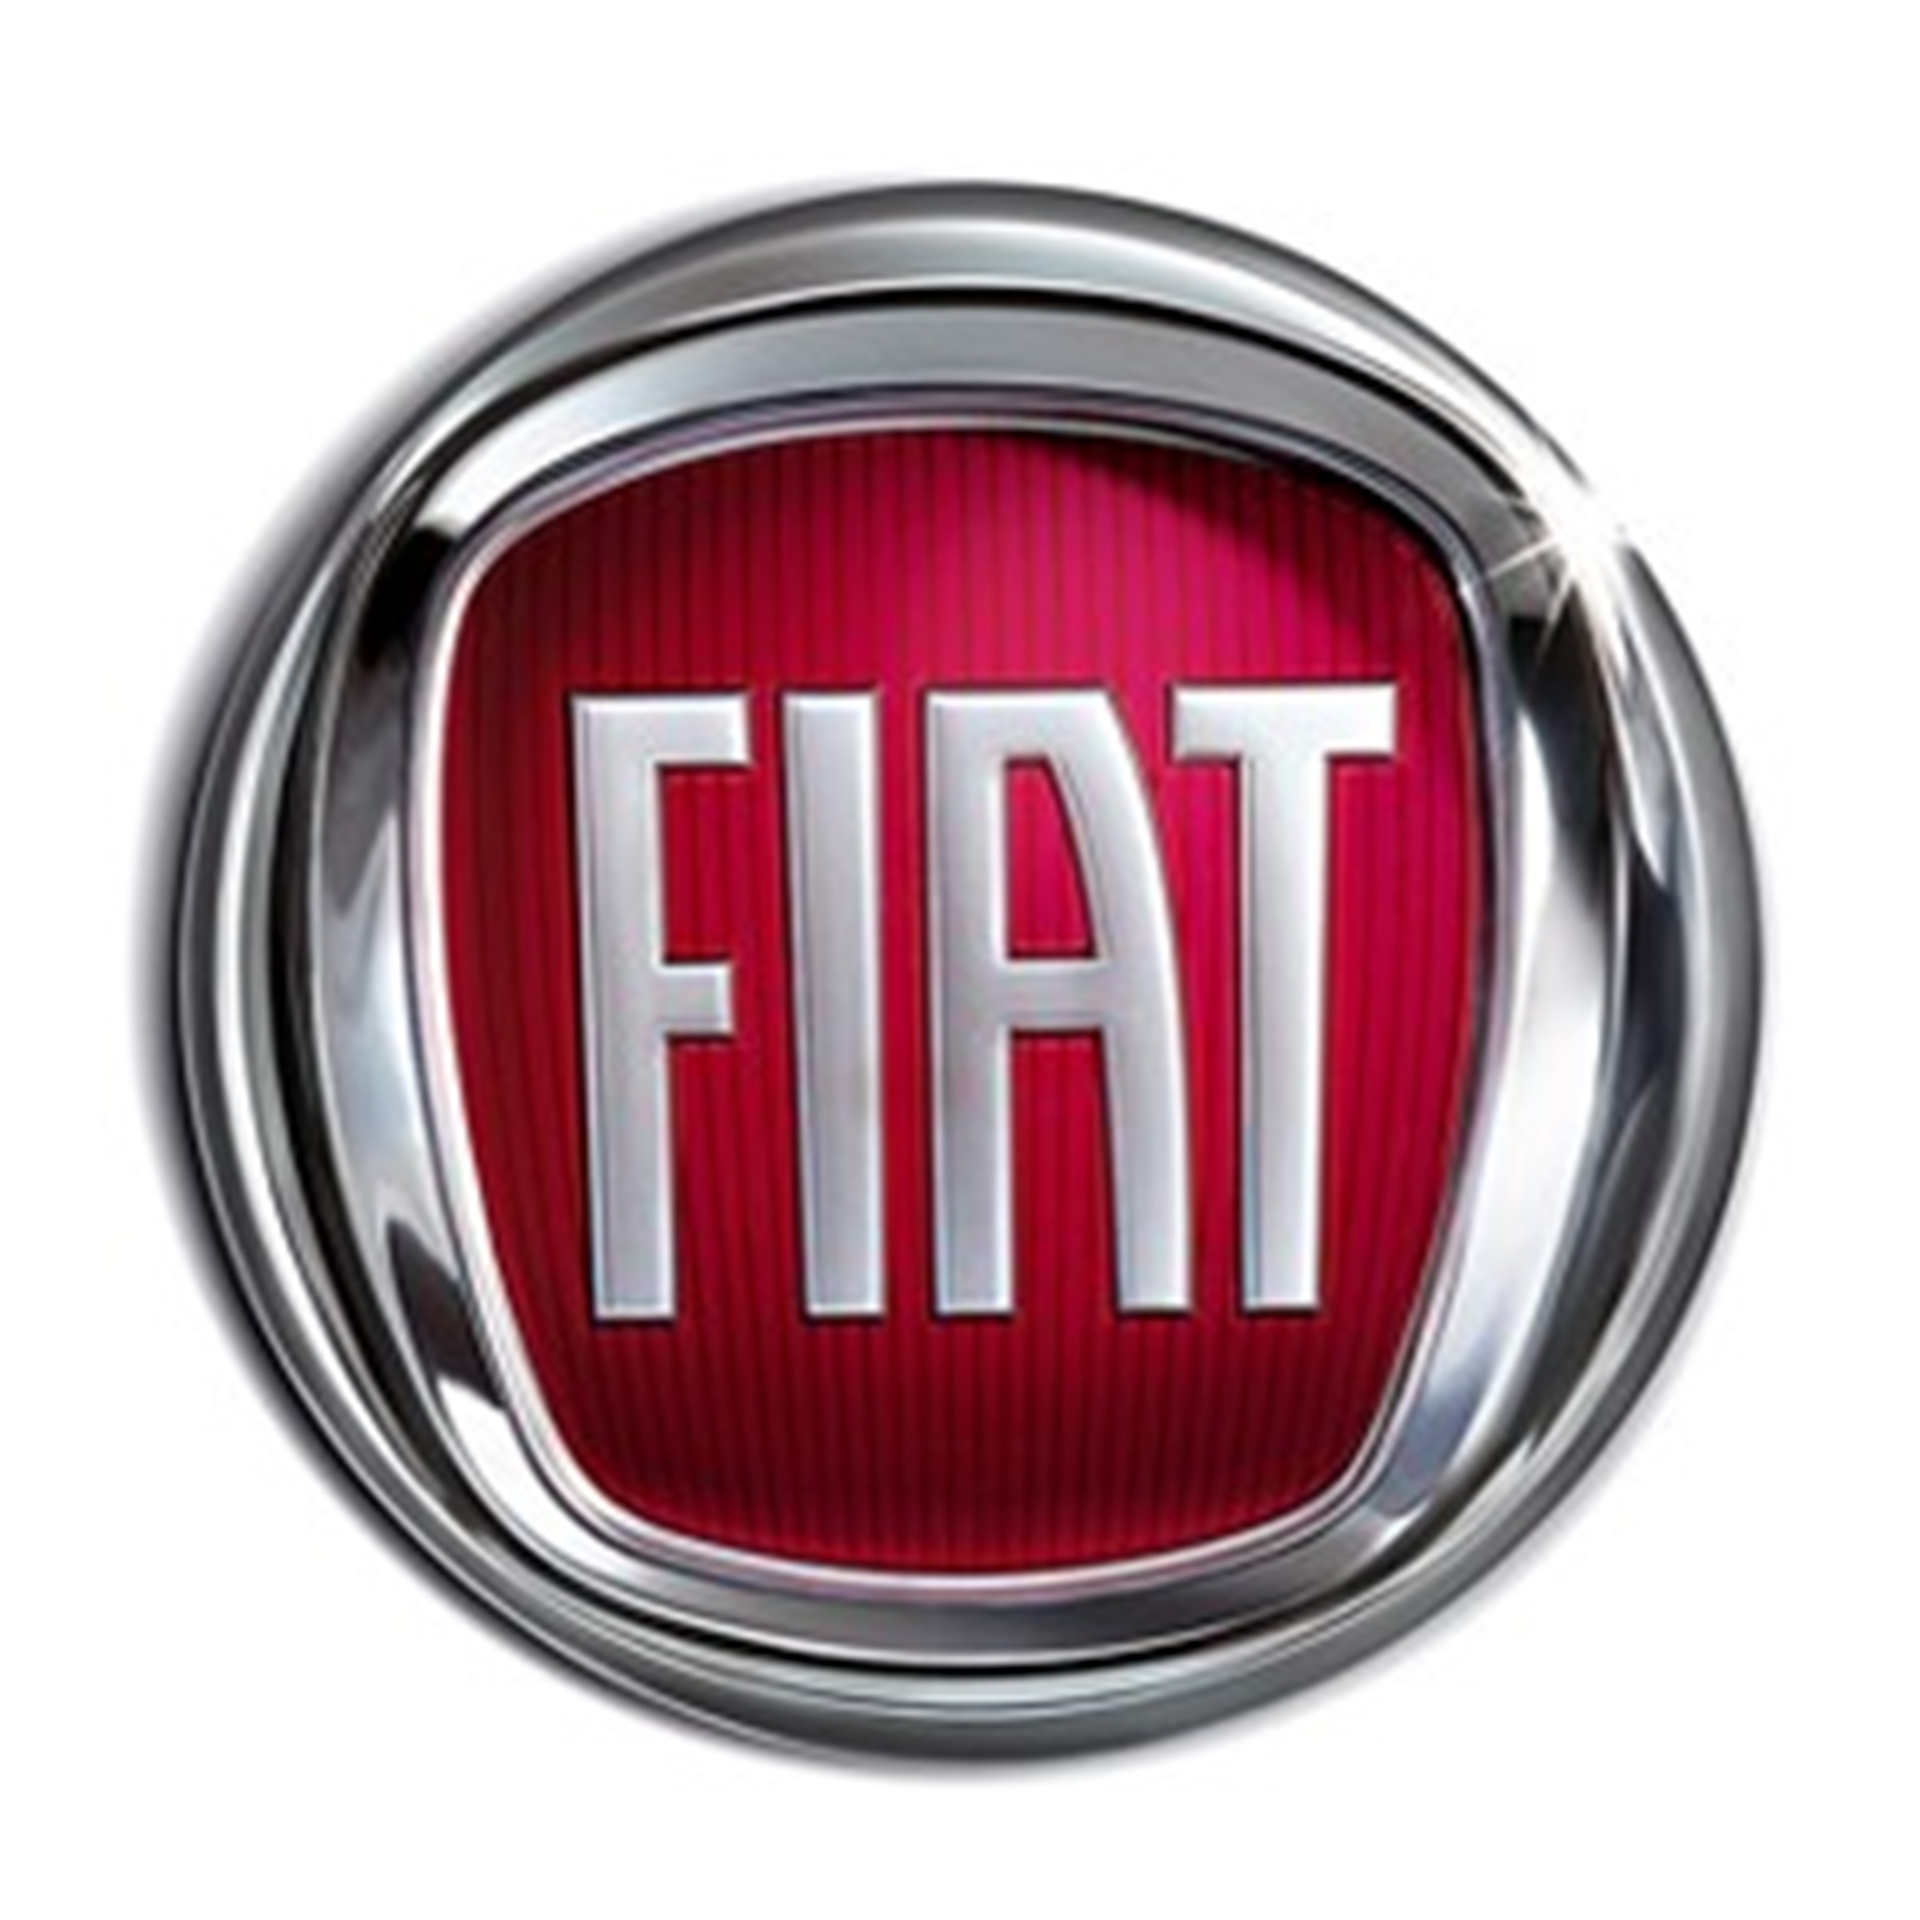 Fiat Brand Records the Lowest Co2 Emissions in Europe for the Fifth Year Running